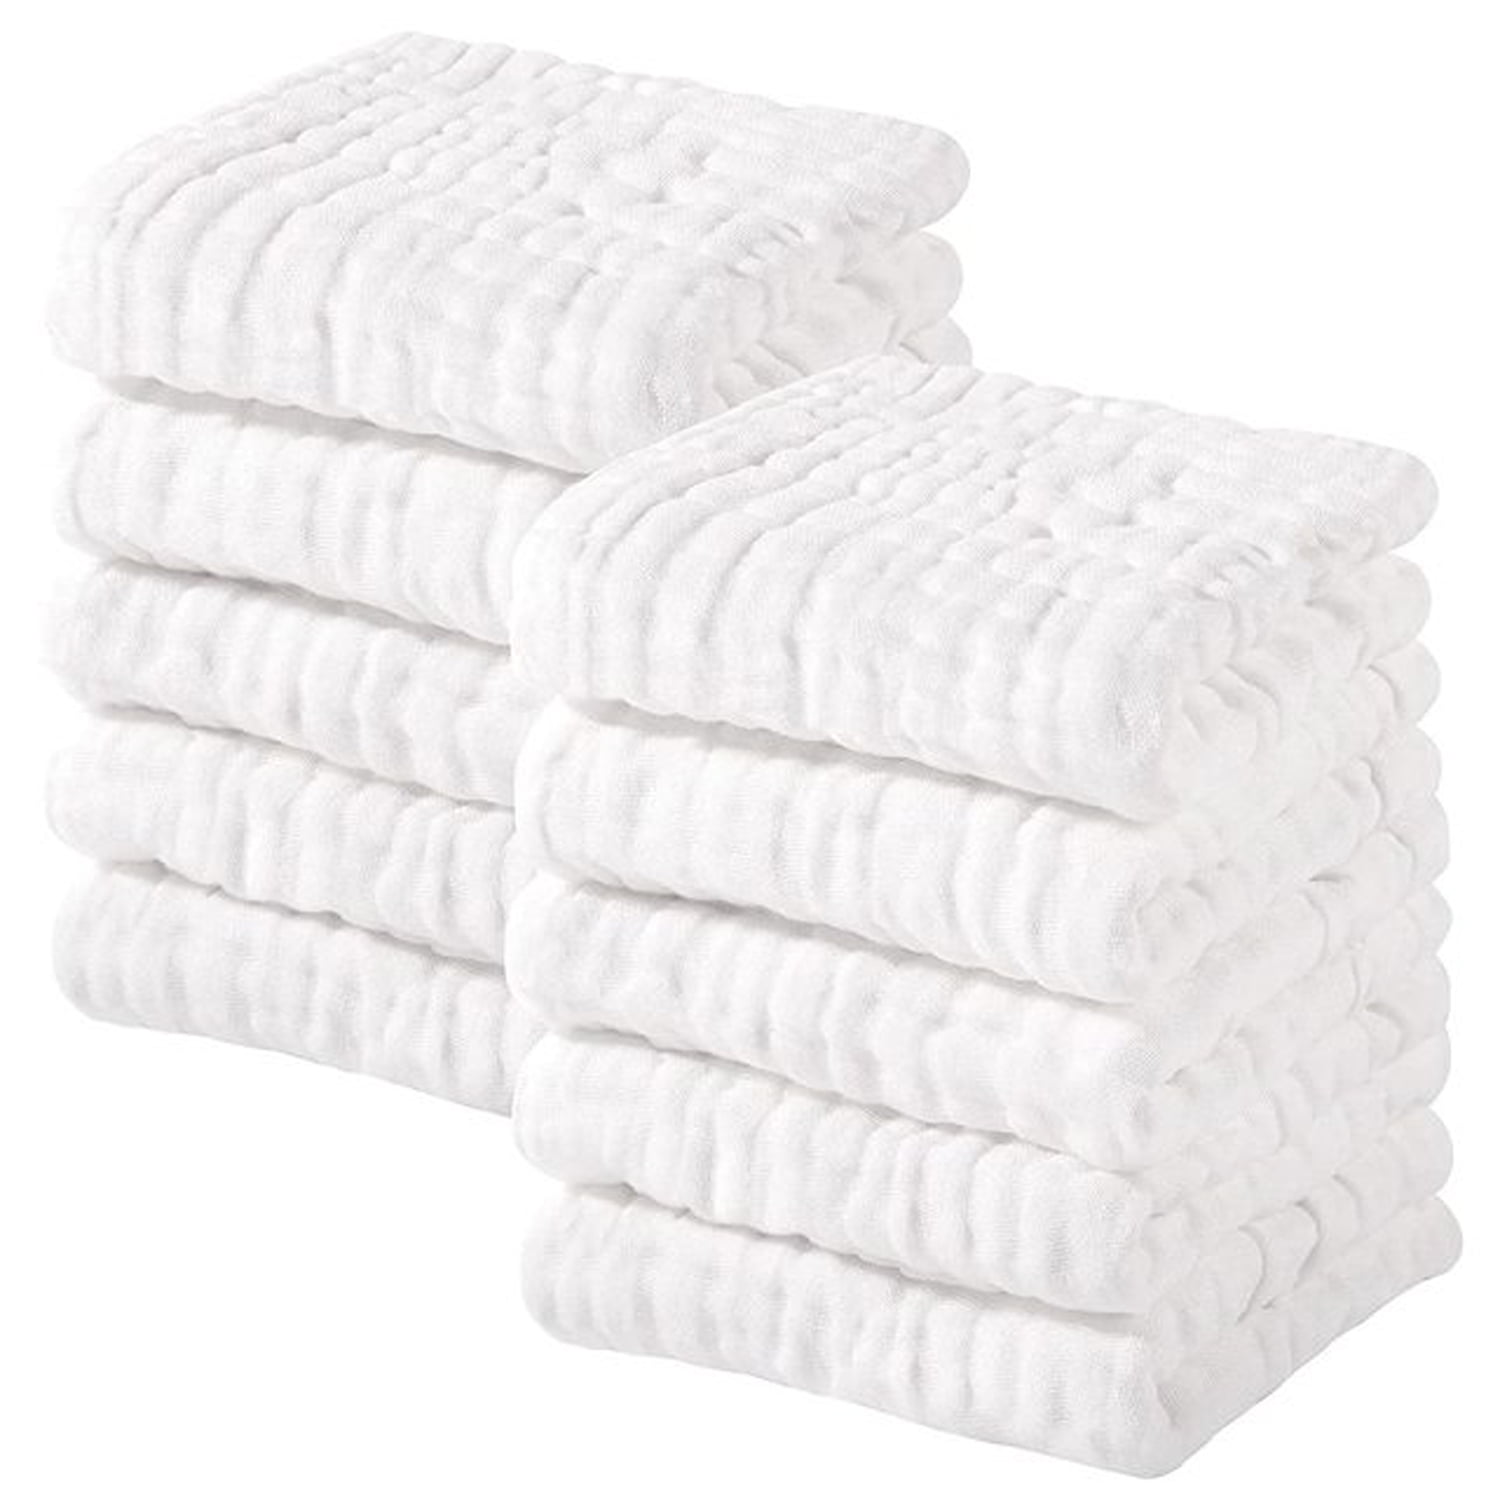 Wholesale Square Wipe Faces Towel Solid Color Children Towel Bamboo Fiber  Wiping Hands Towels With Hook Absorbent Face Wash Rag 25*25cm From  Maxsending, $1.09